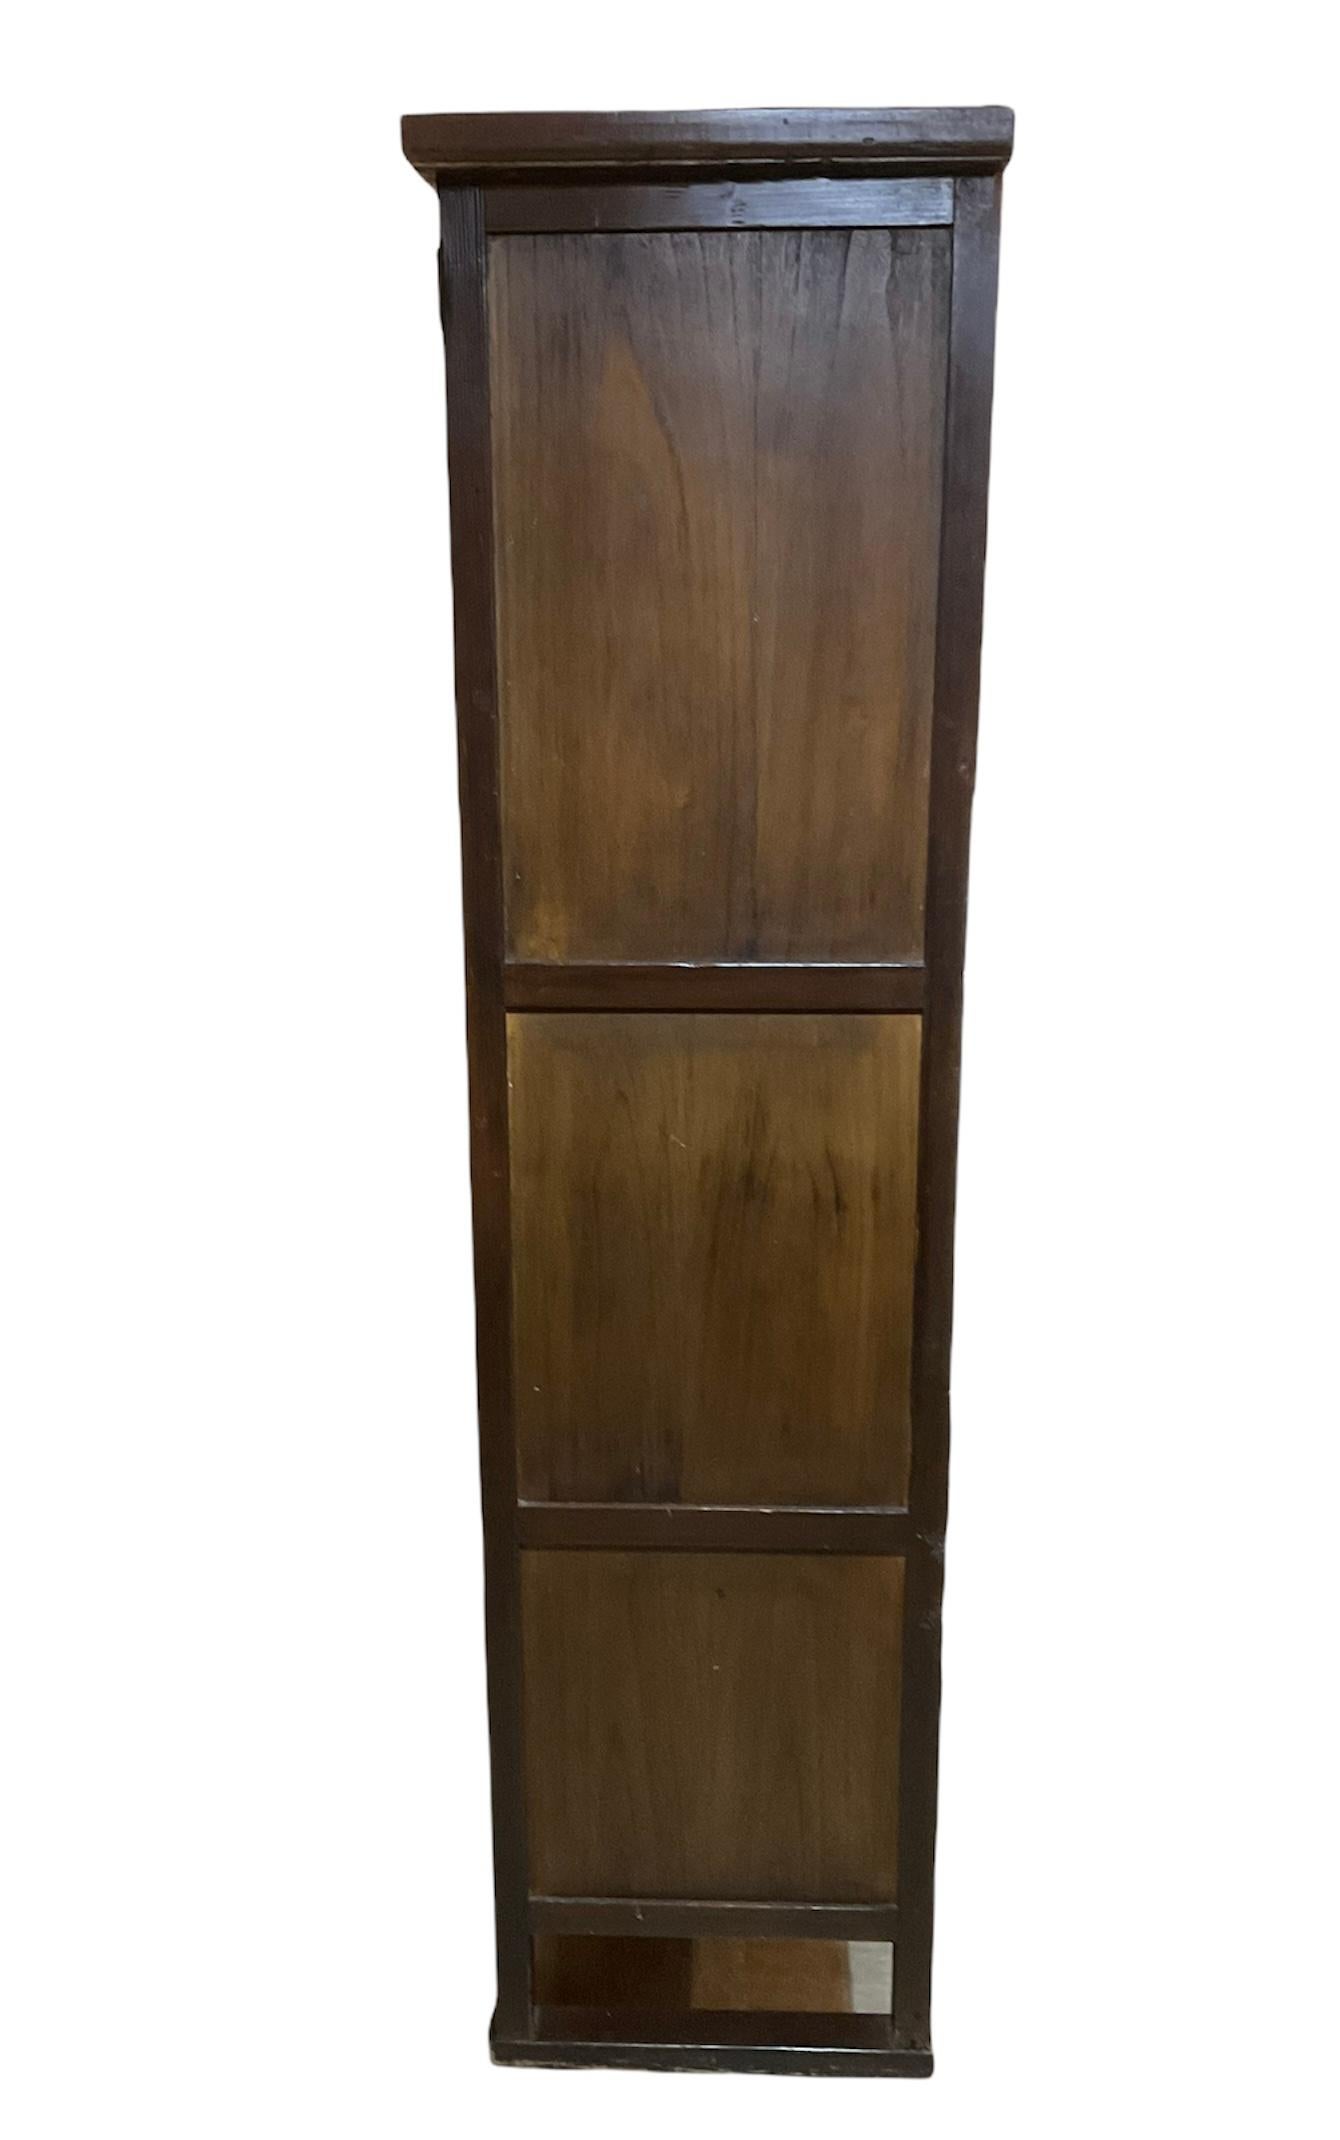 This is a Korean large wood cabinet/chest. The cabinet has two drawers at the top with C-shaped iron handles and below it, there are 3 compartments. They go from the biggest to the smallest one. Each one has hinged doors decorated with iron round